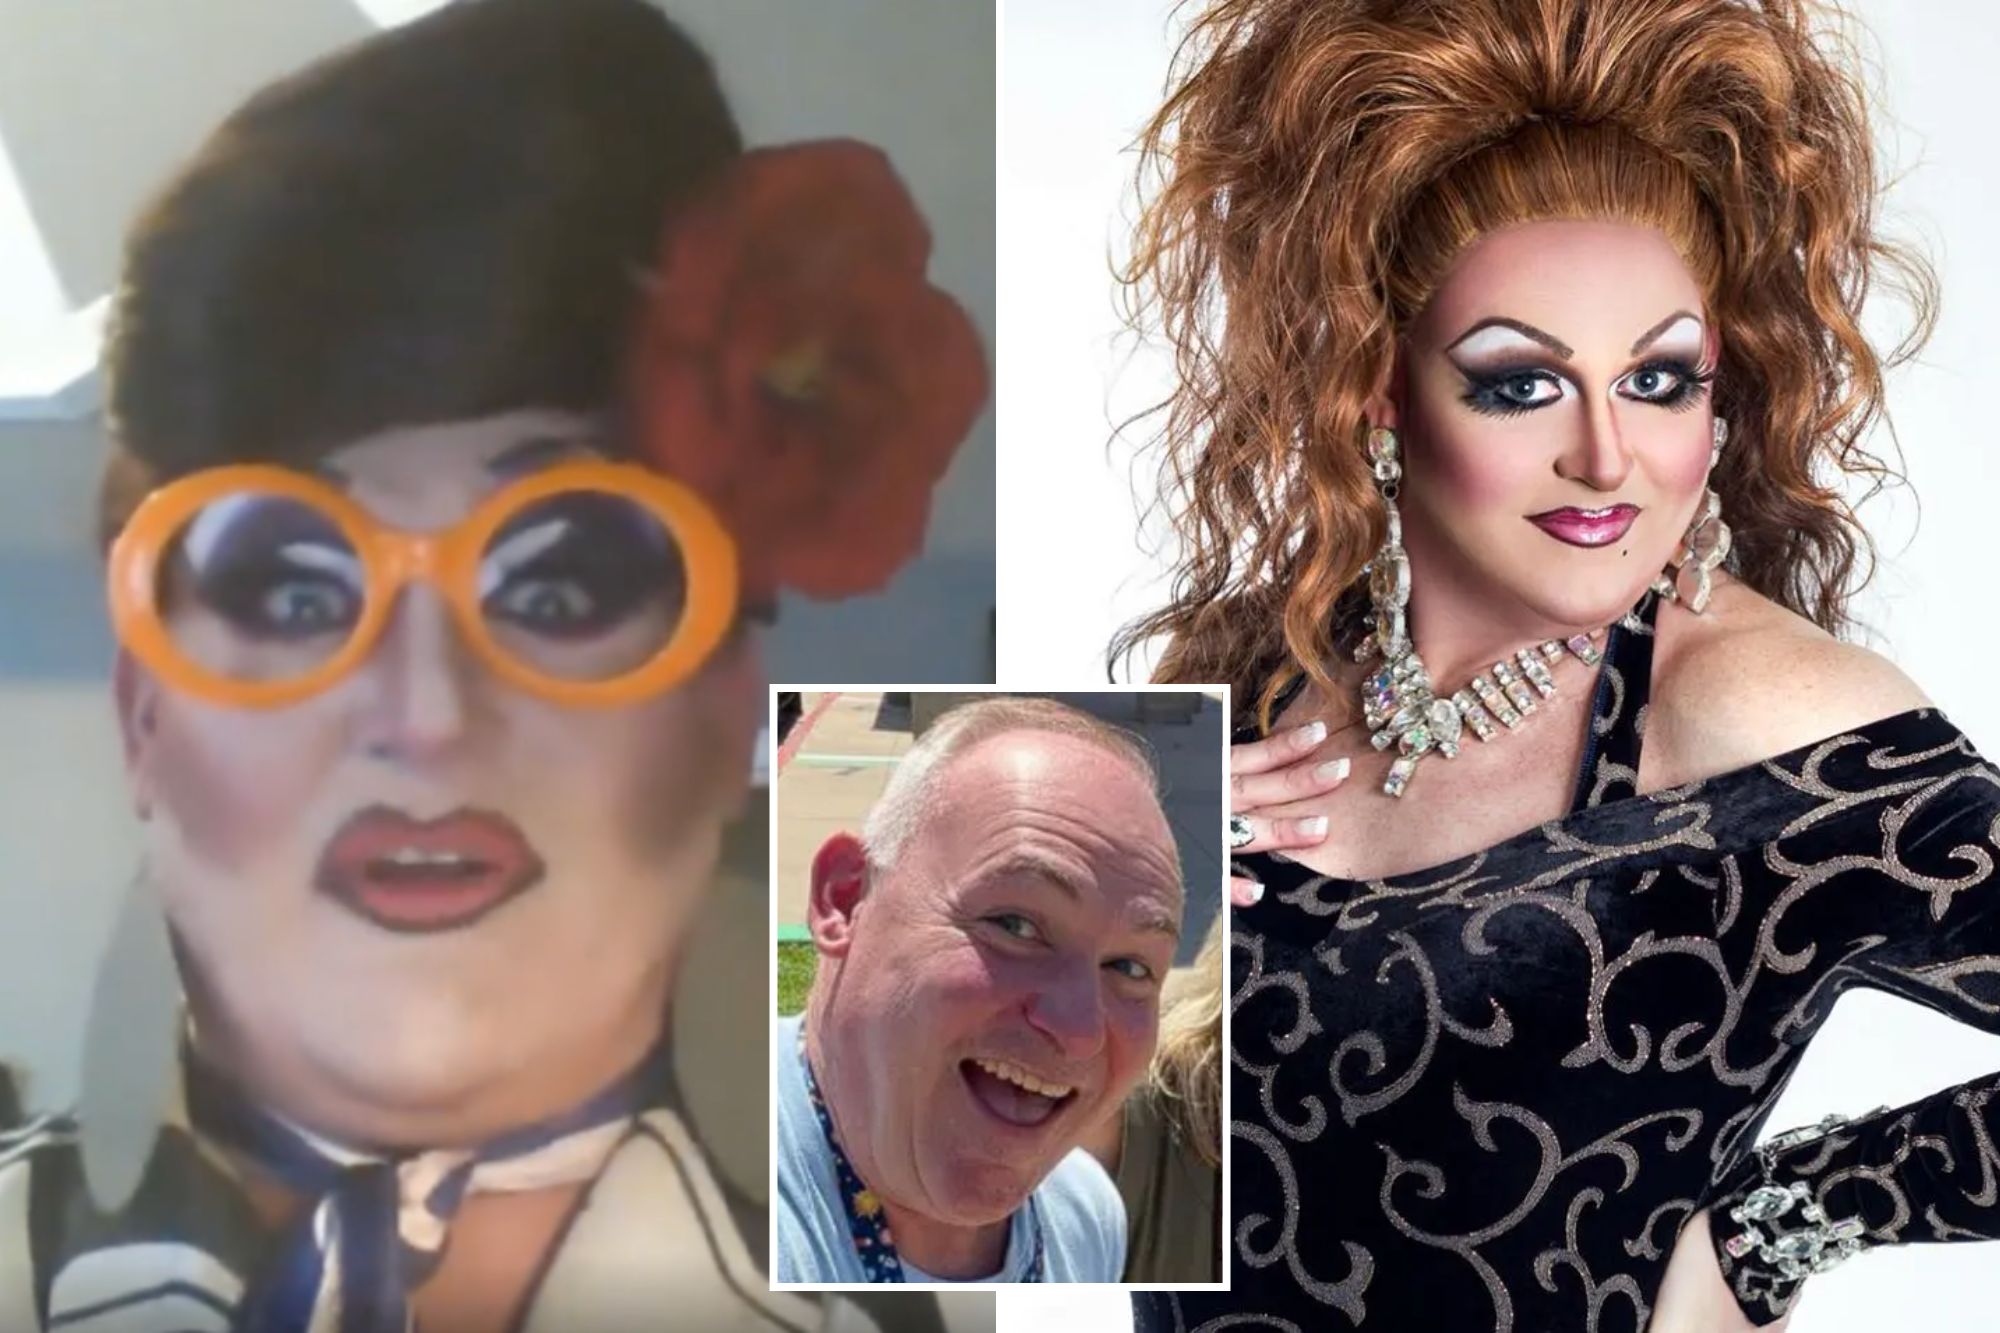 Oklahoma drag queen primary school principal resigns amid protests, official claims